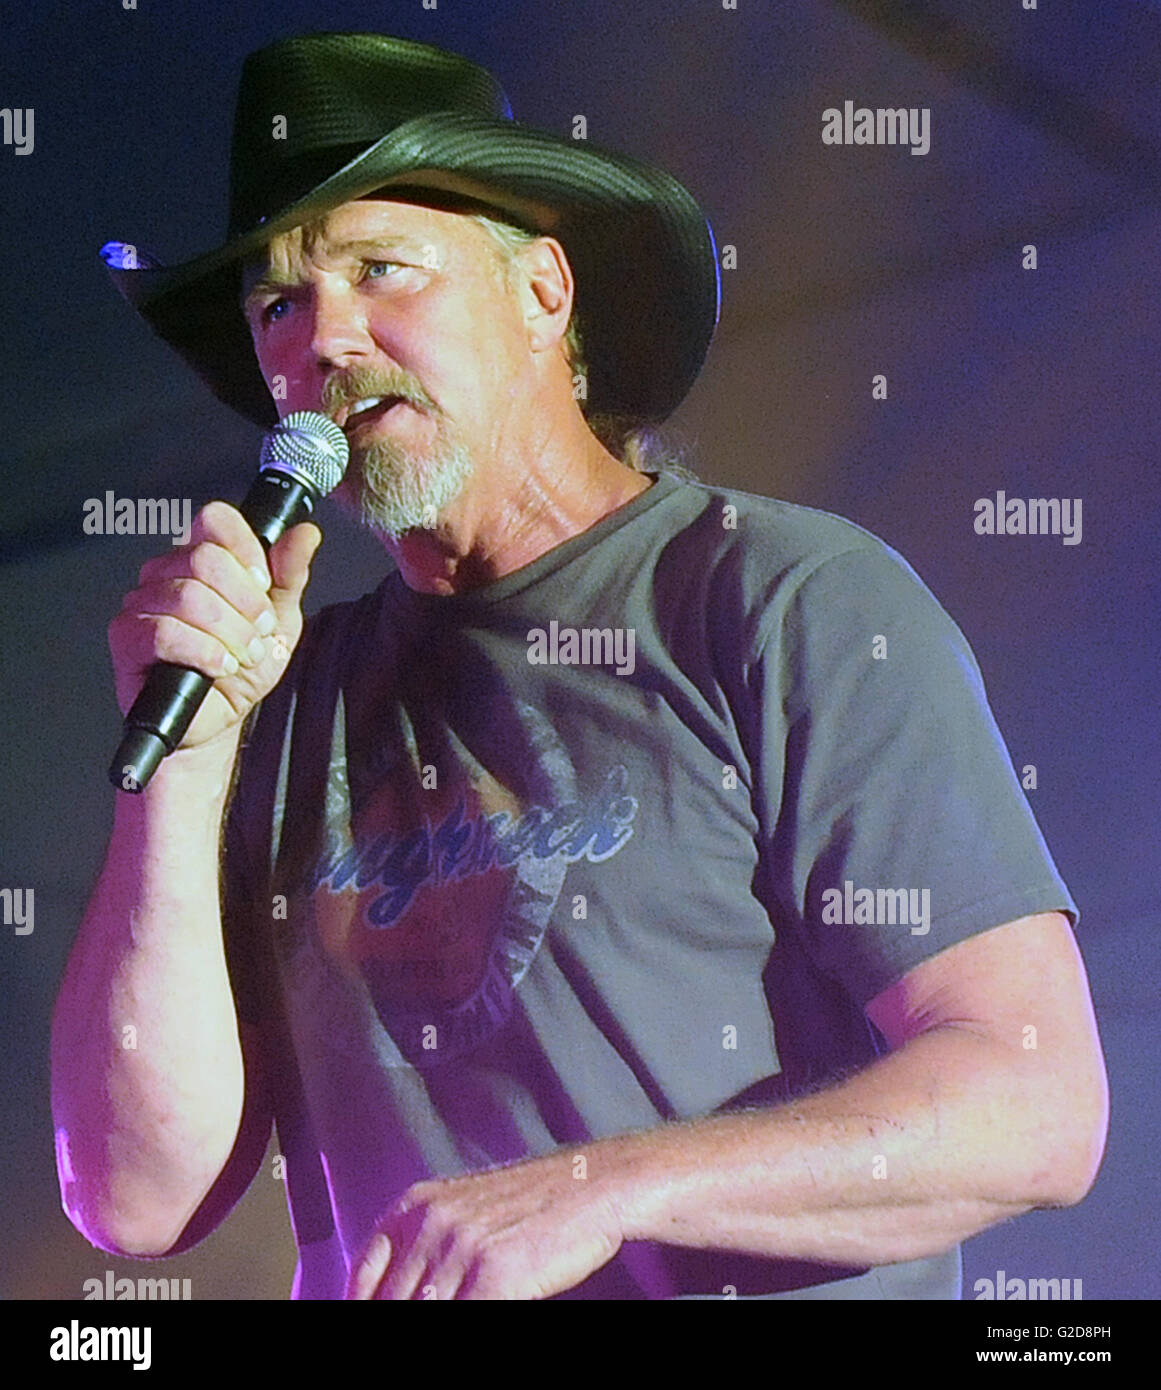 Daytona Beach, Florida, USA. 27th May, 2016. Country singer Trace Adkins performs at the Country 500 Great American Music Fest at Daytona, held at the Daytona International Speedway in Daytona Beach, Florida on May 27, 2016. The three day event over Memorial Day weekend was scheduled to feature nearly 40 country music artists on two stages. Credit:  Paul Hennessy/Alamy Live News Stock Photo